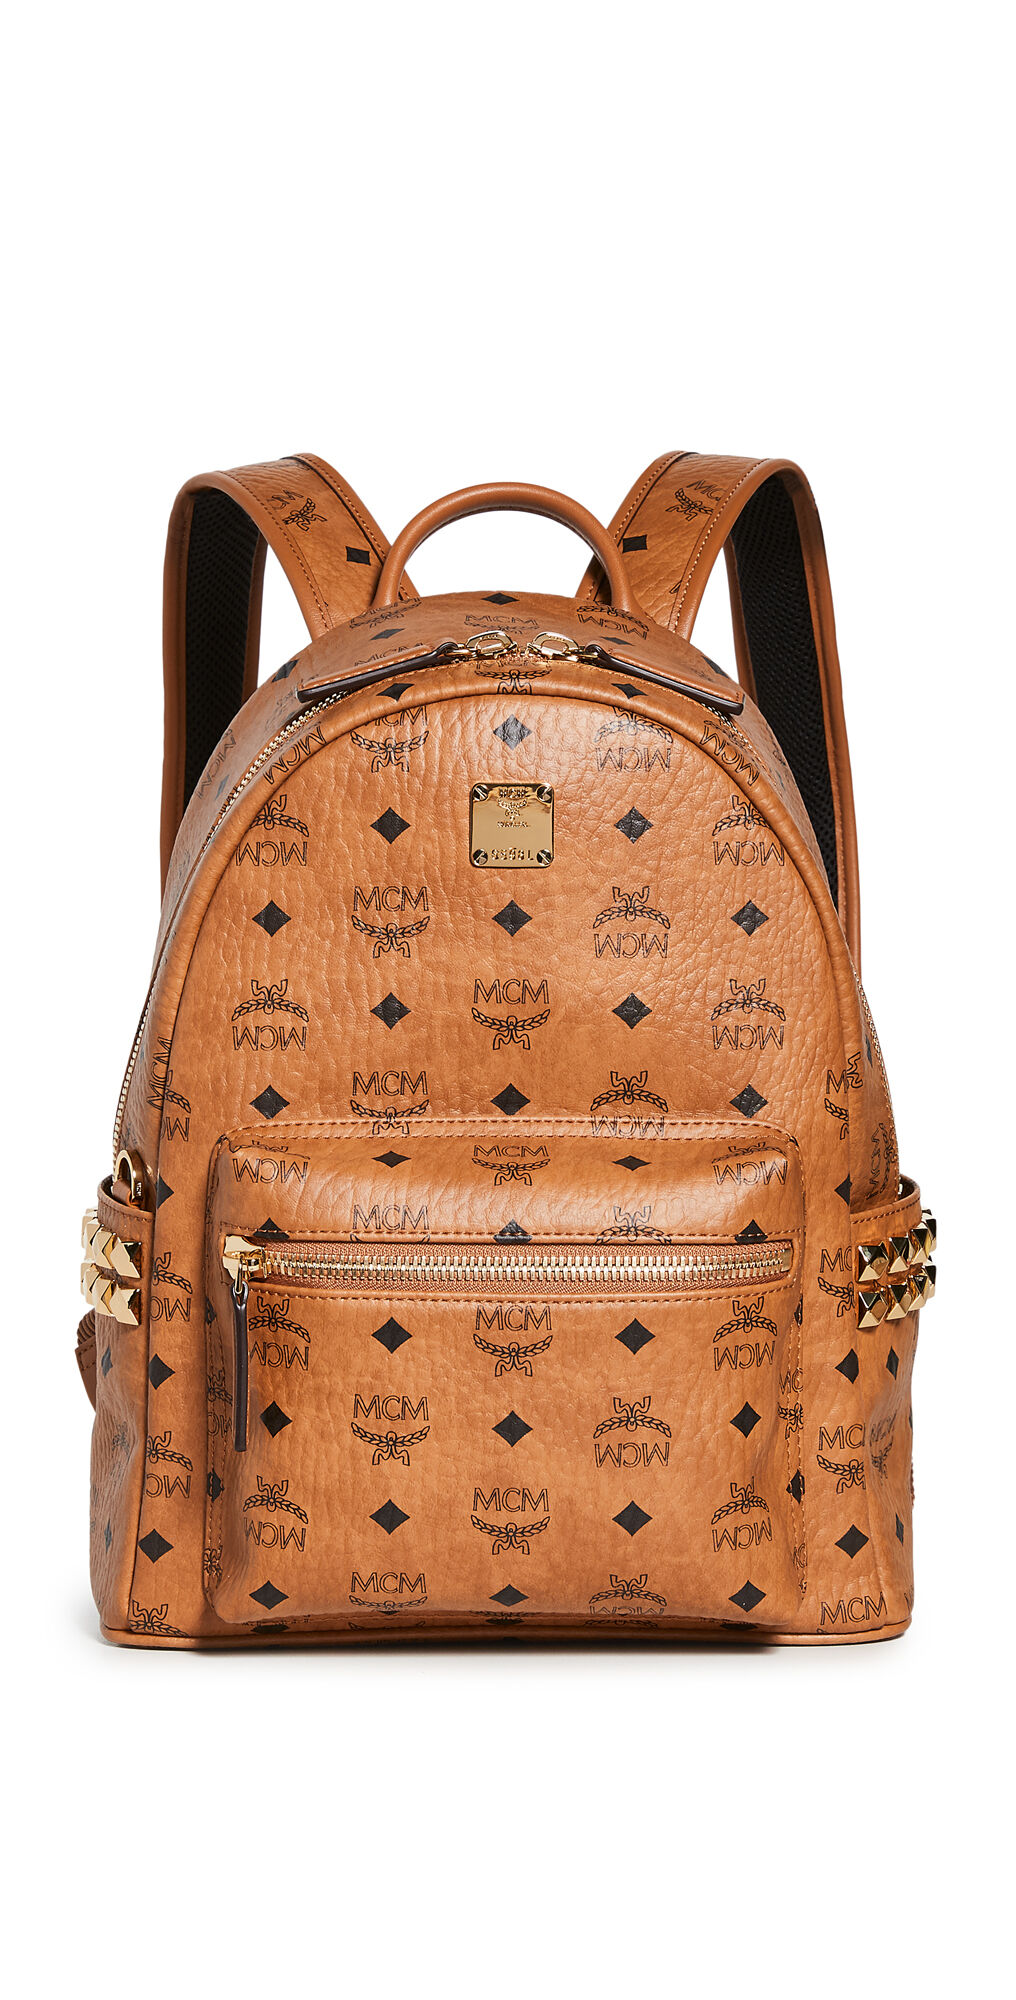 MCM Small Backpack Cognac One Size  Cognac  size:One Size